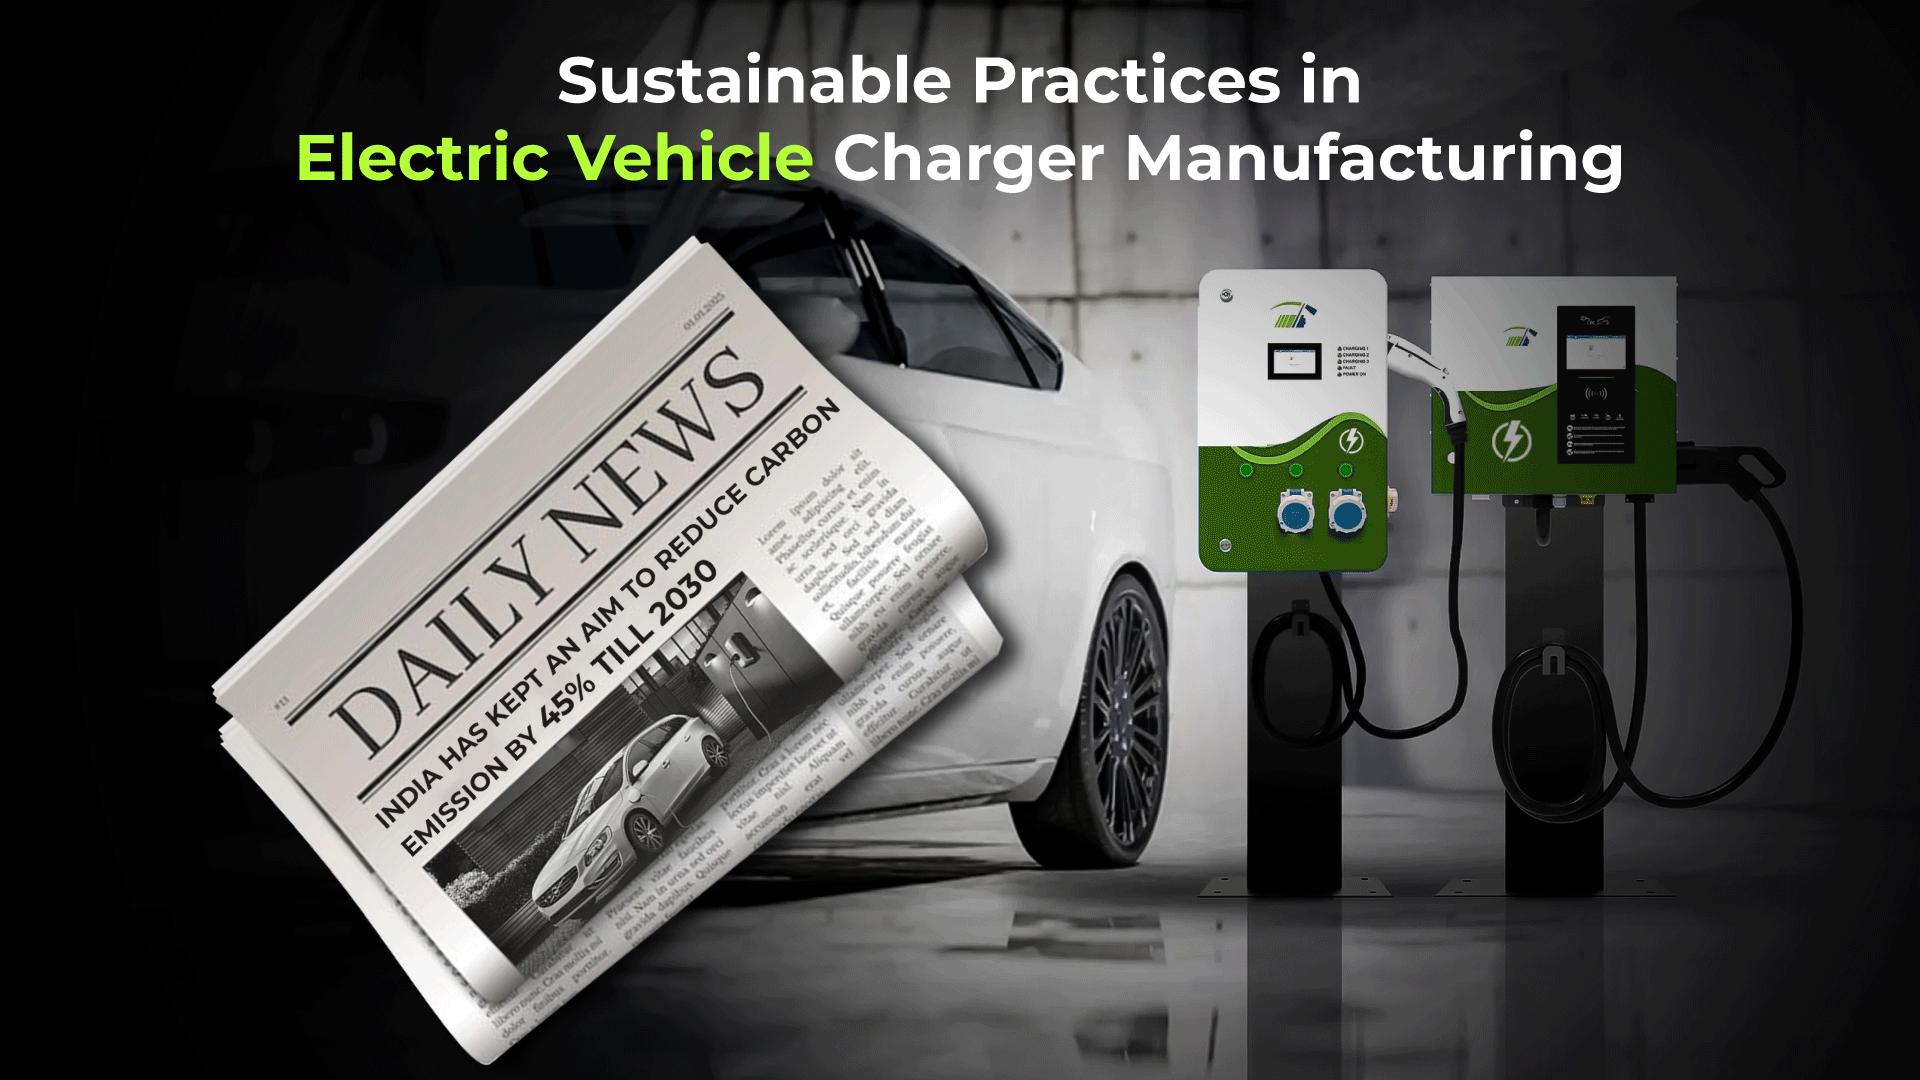 Sustainable Practices in Electric Vehicle Charger Manufacturing